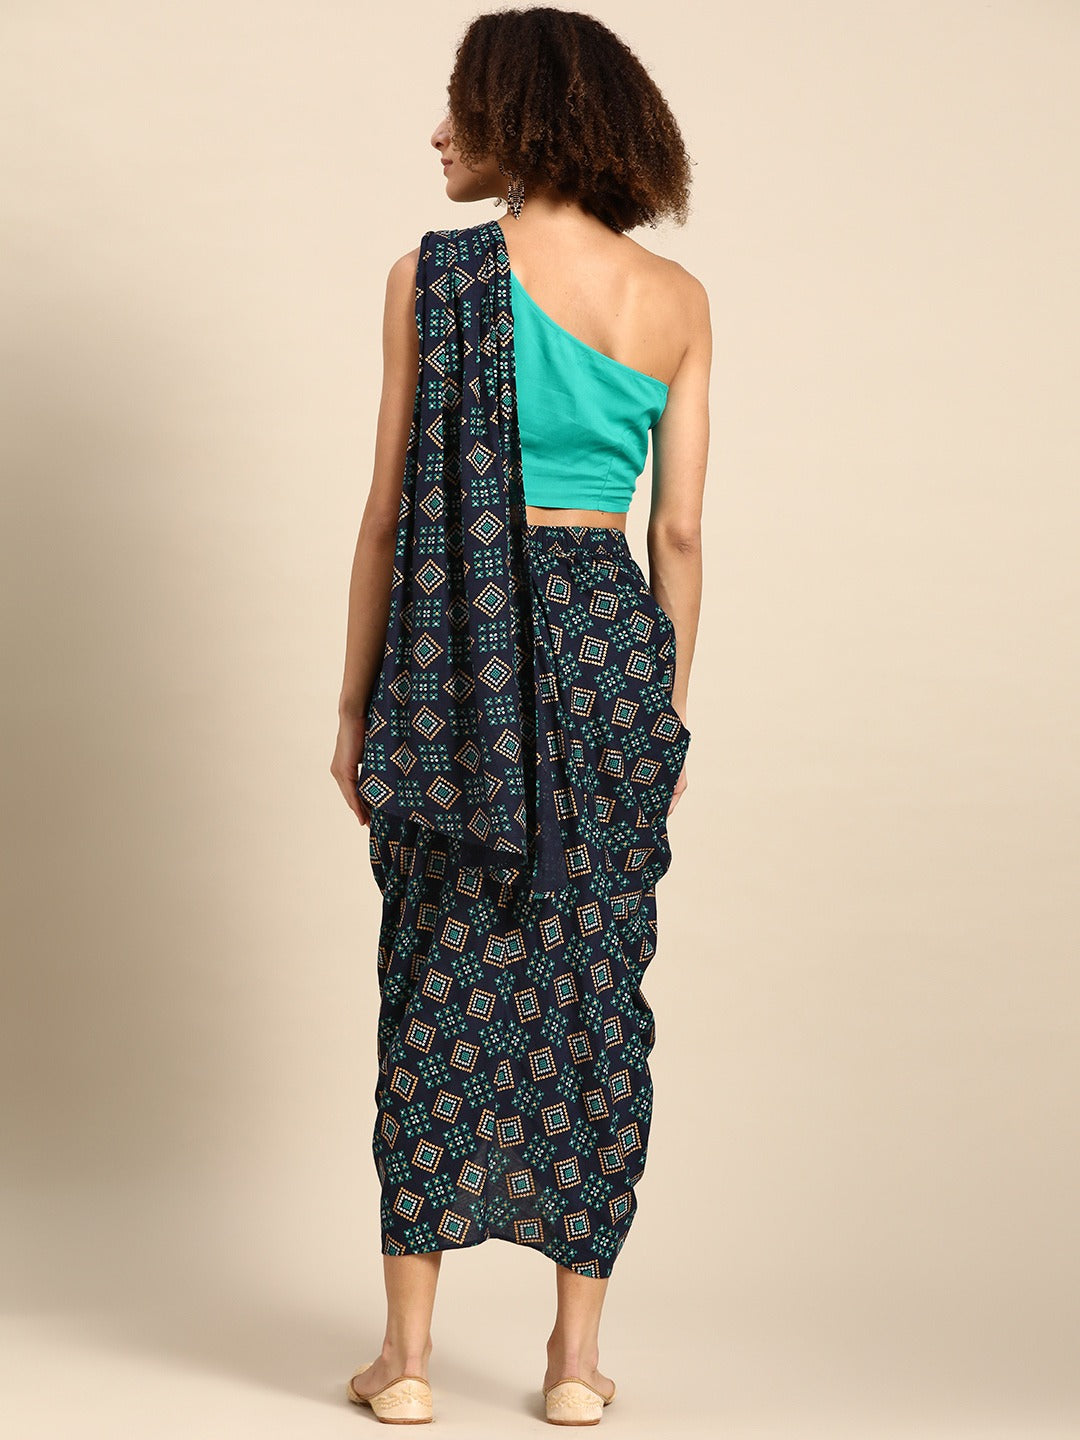 Cowl Skirt with dupatta drape and blouse